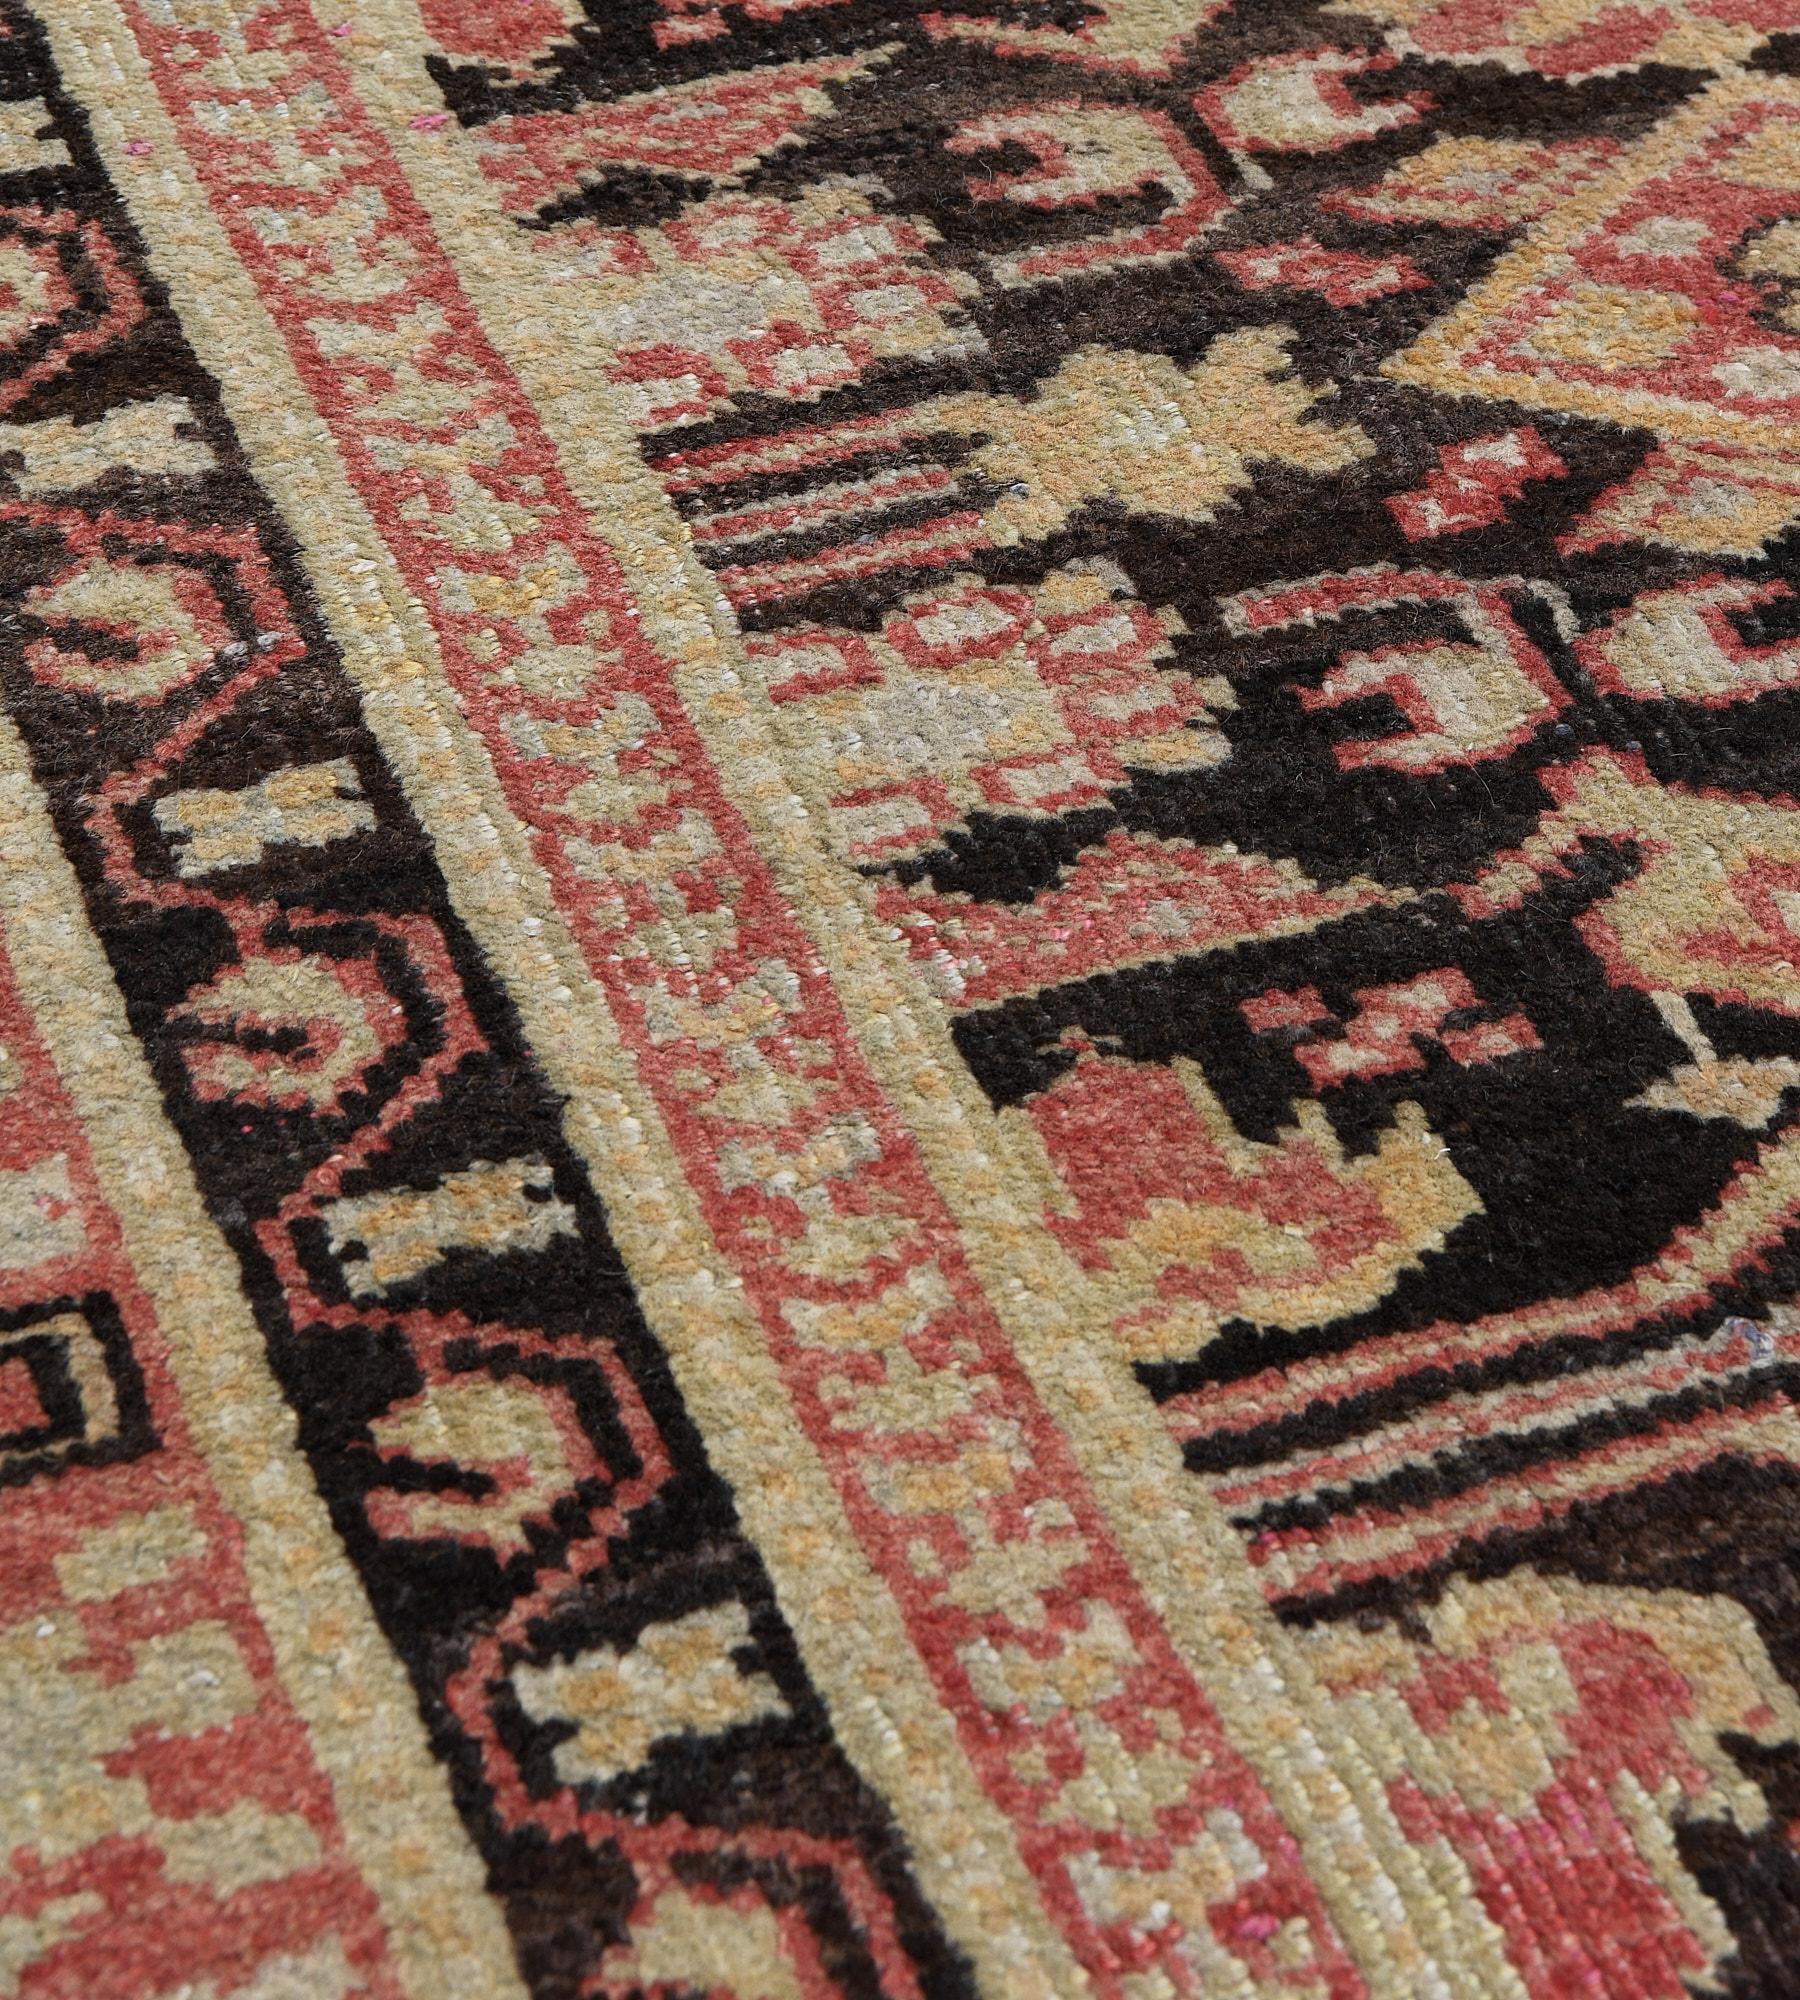 Antique Circa-1900 Herati-Pattern Turkish Rug In Good Condition For Sale In West Hollywood, CA